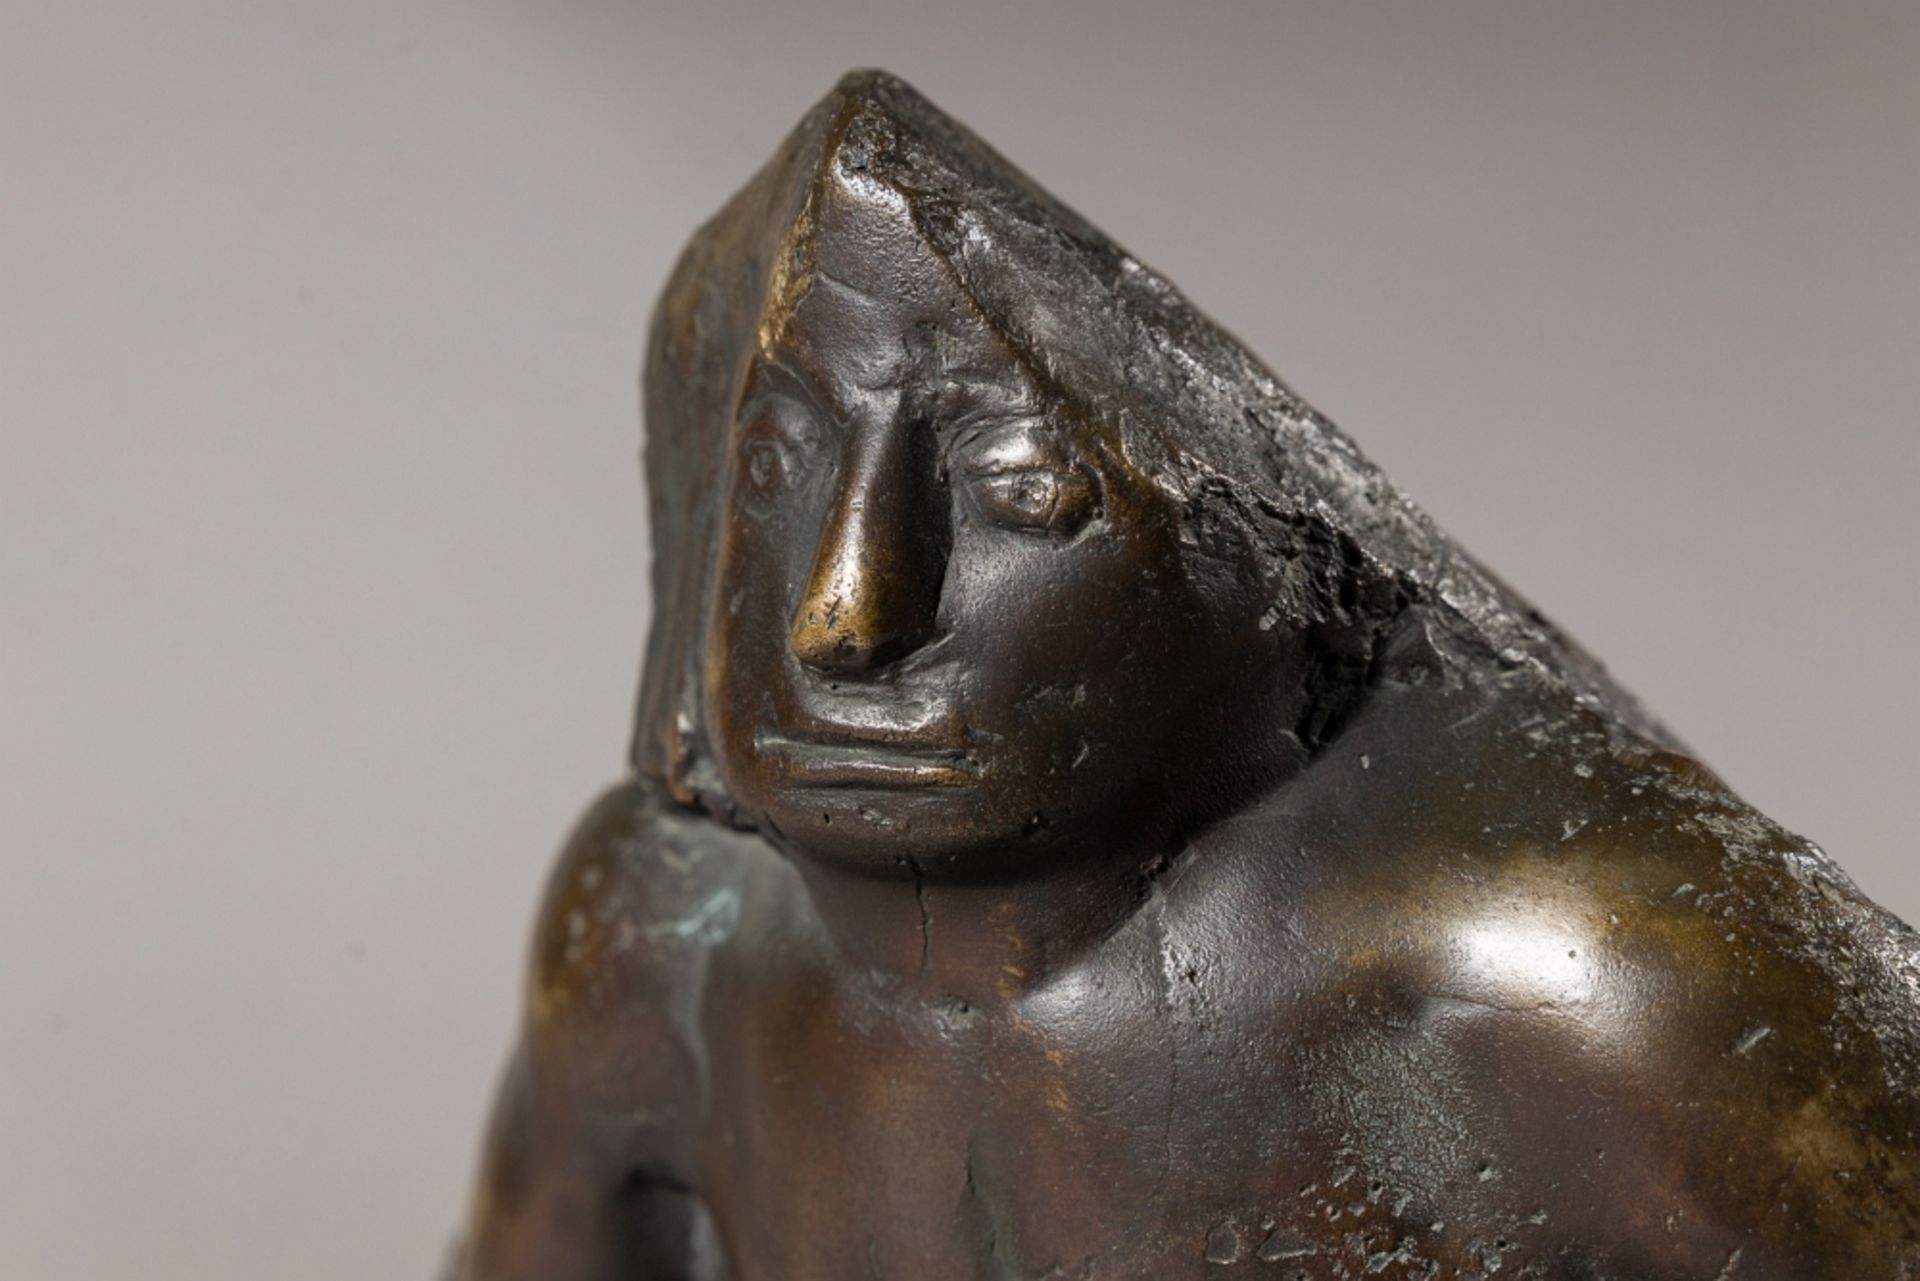 Bottoli, Oskar (1921 - 1996) Seated Figure, 1981 Bronze Casting Monogrammed, dated and numbered: 7/2 - Image 2 of 6